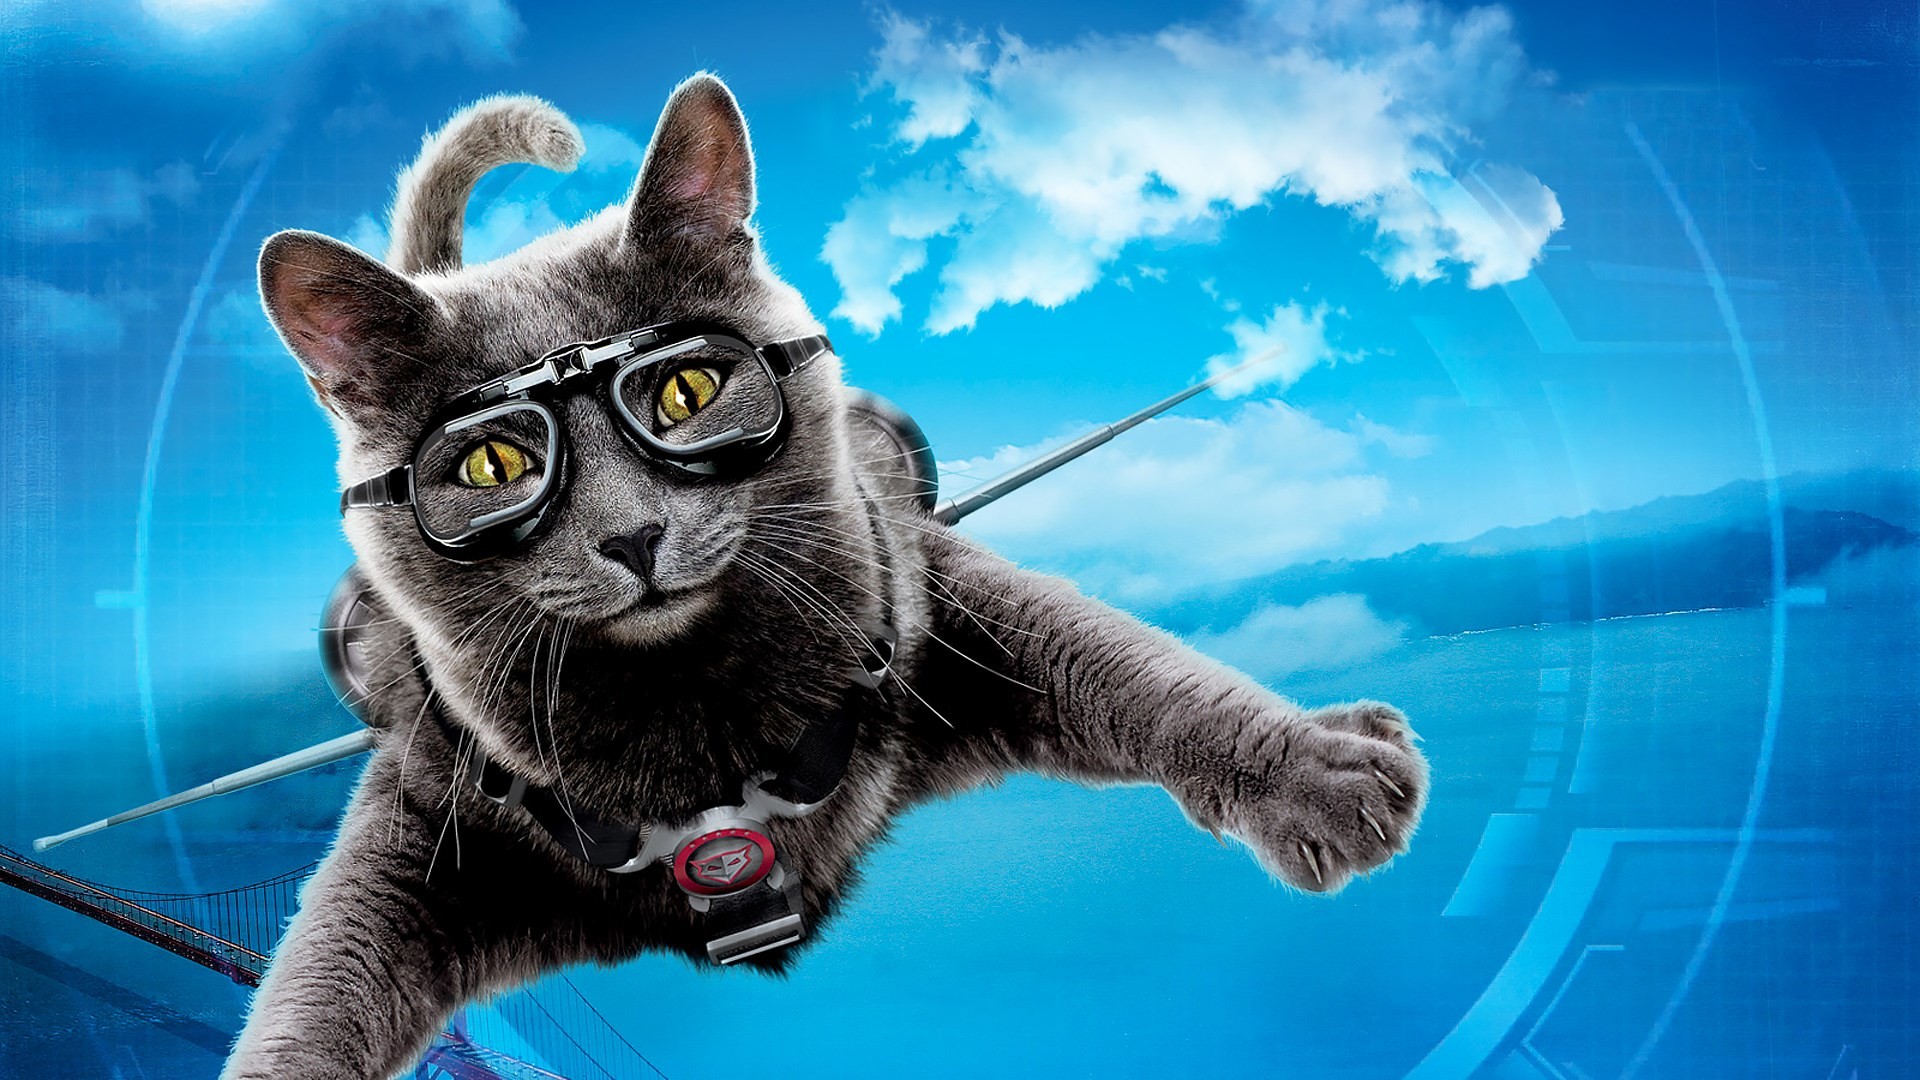 1920x1080 HQ RES cats and dogs the revenge of kitty galore backround, 436 kB - Hubert